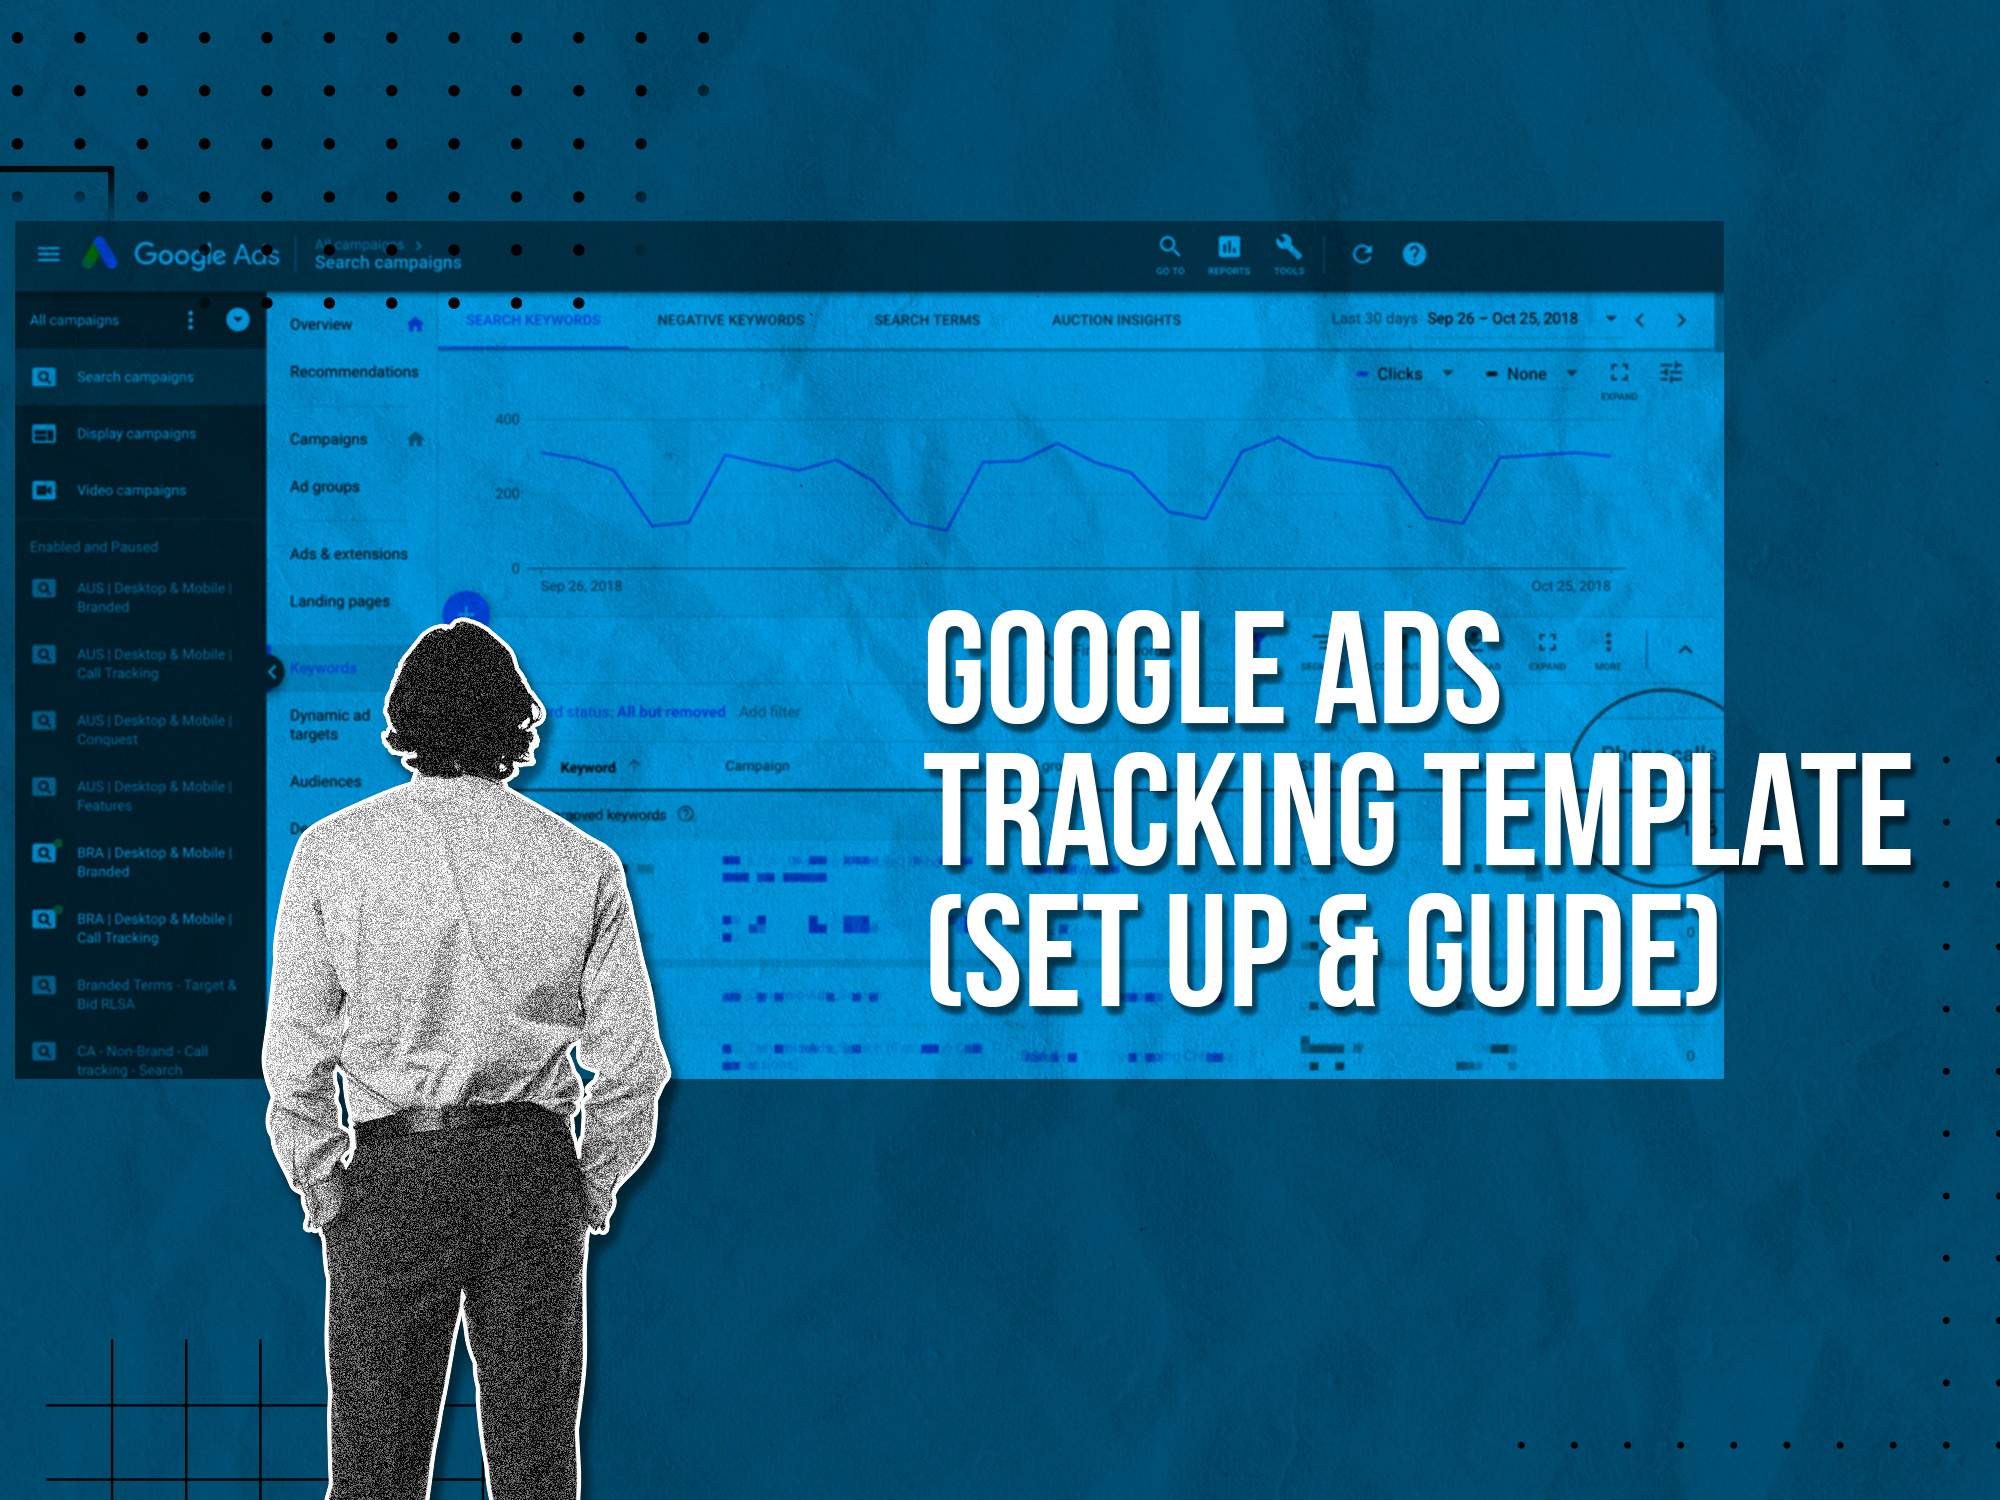 Google Ads Tracking Template (Set Up & Guide)